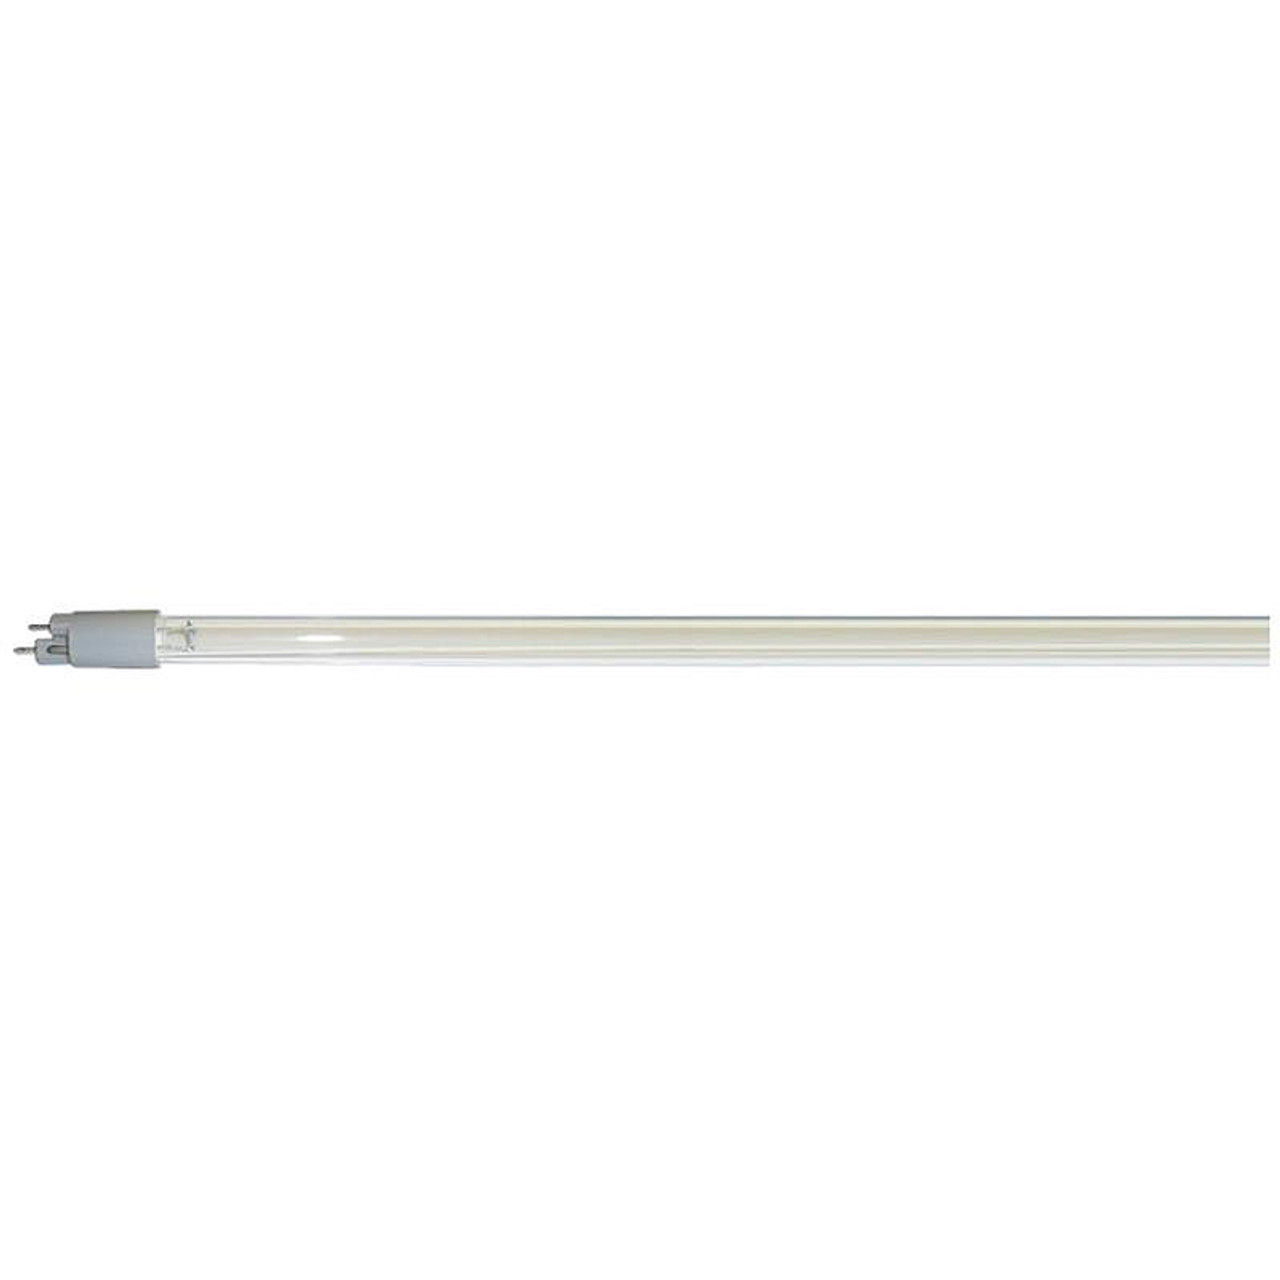 Sterilight S950RL-HO High Output Replacement UV Lamp